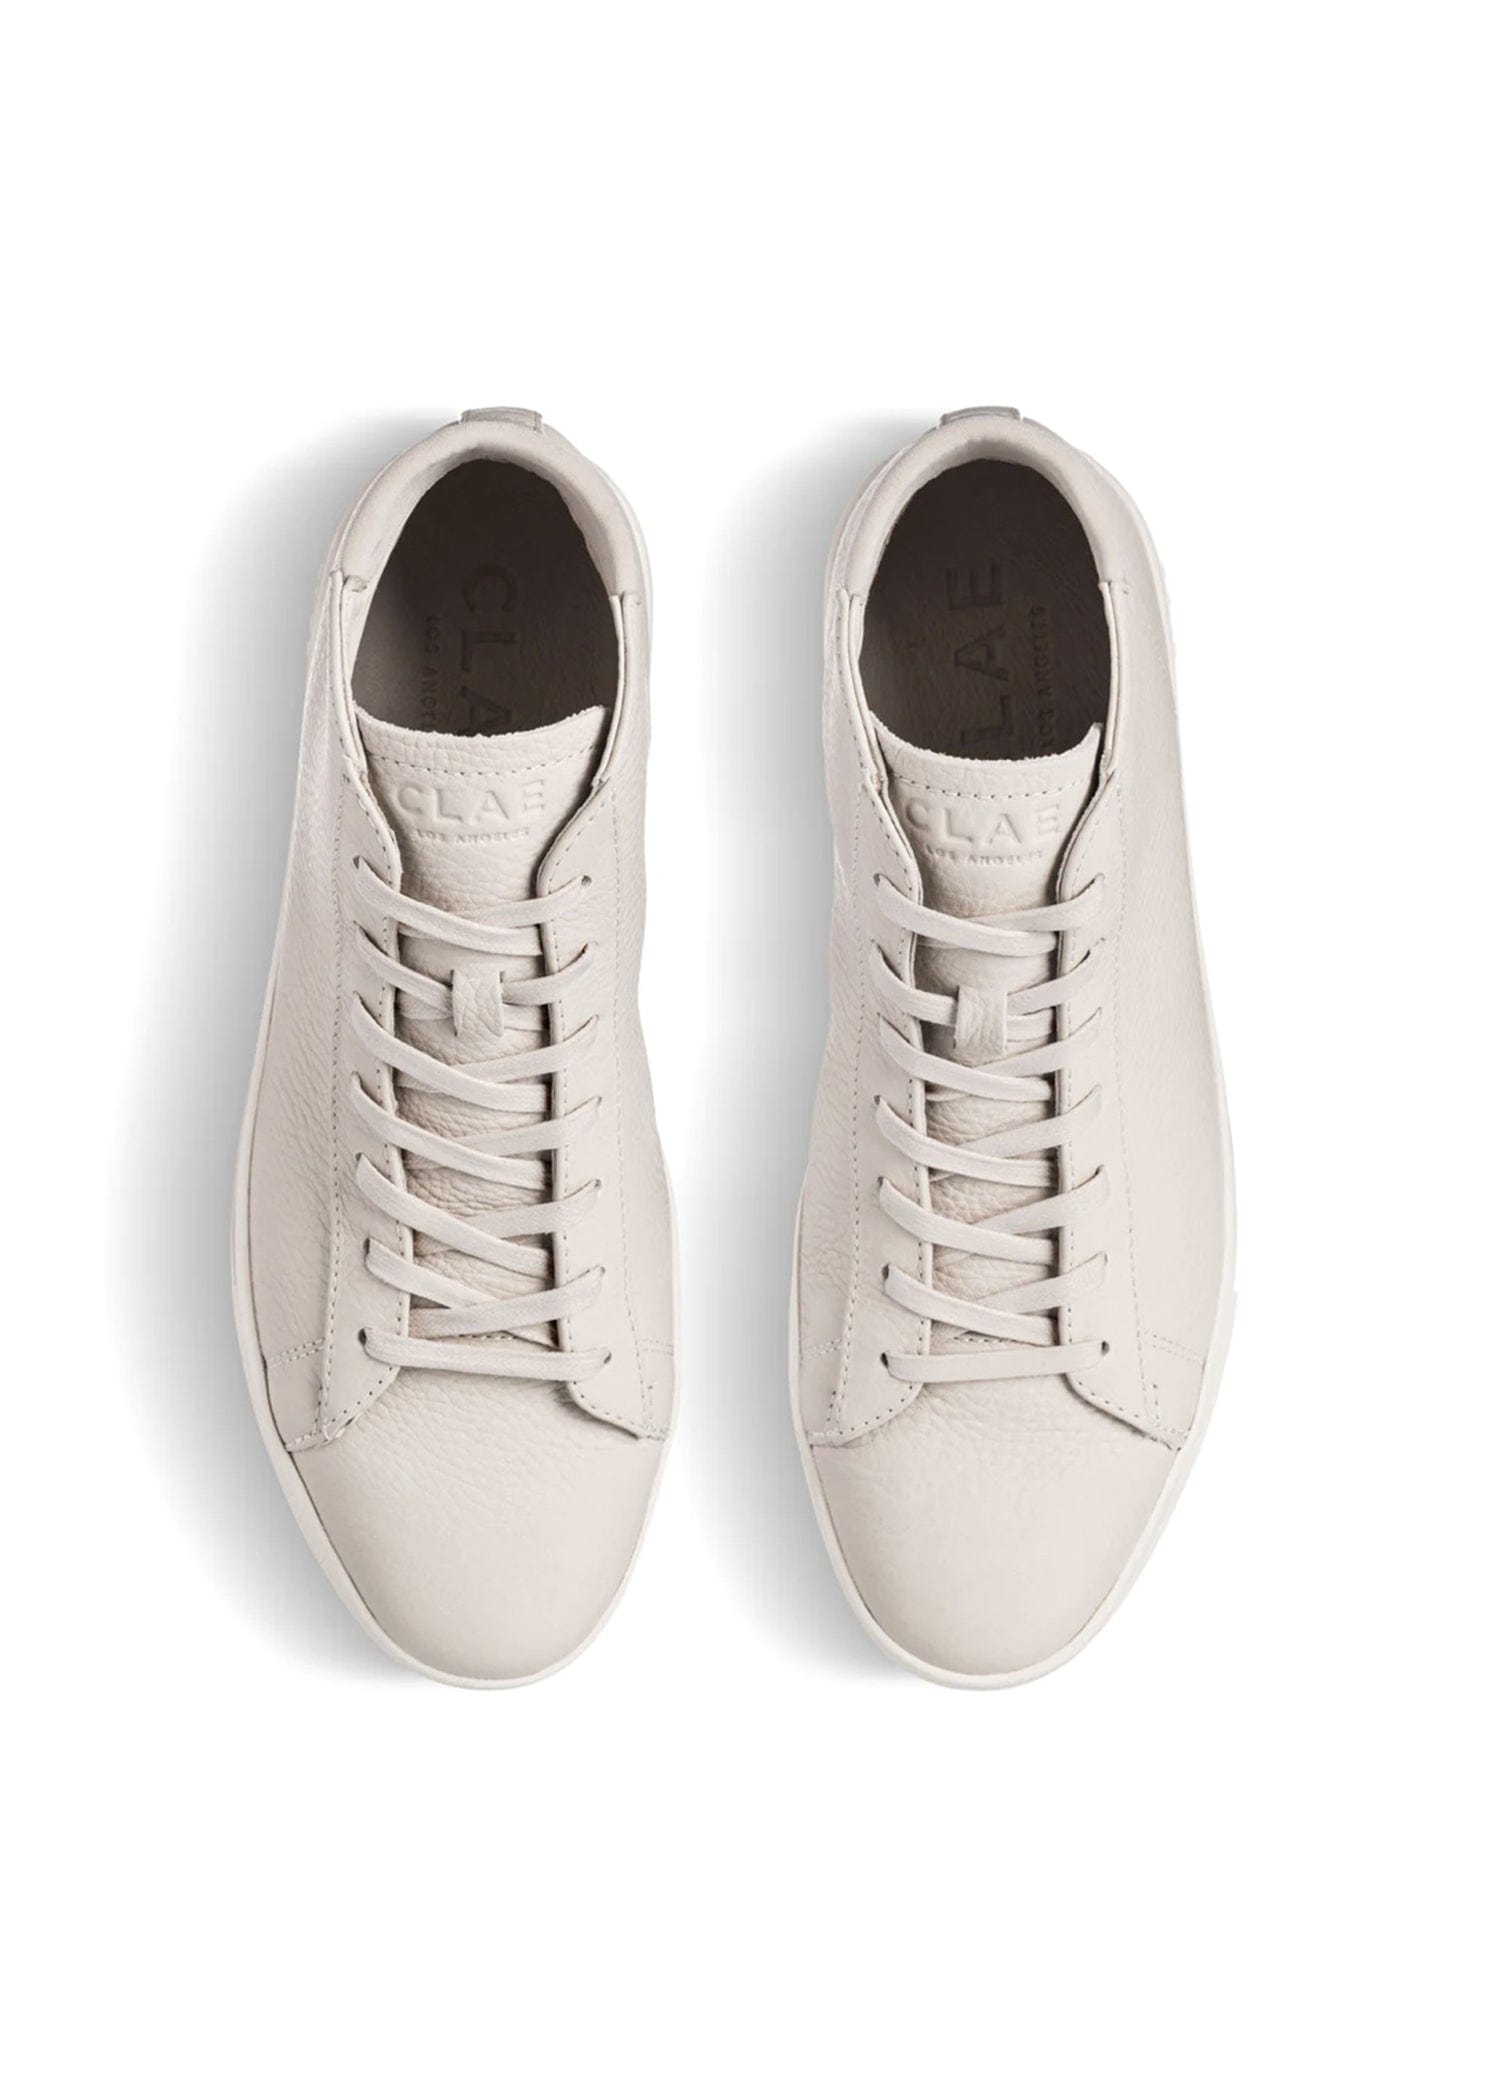 Clae Chaussures Chaussures CLAE - Baskets Bradley Mid Off-White leather